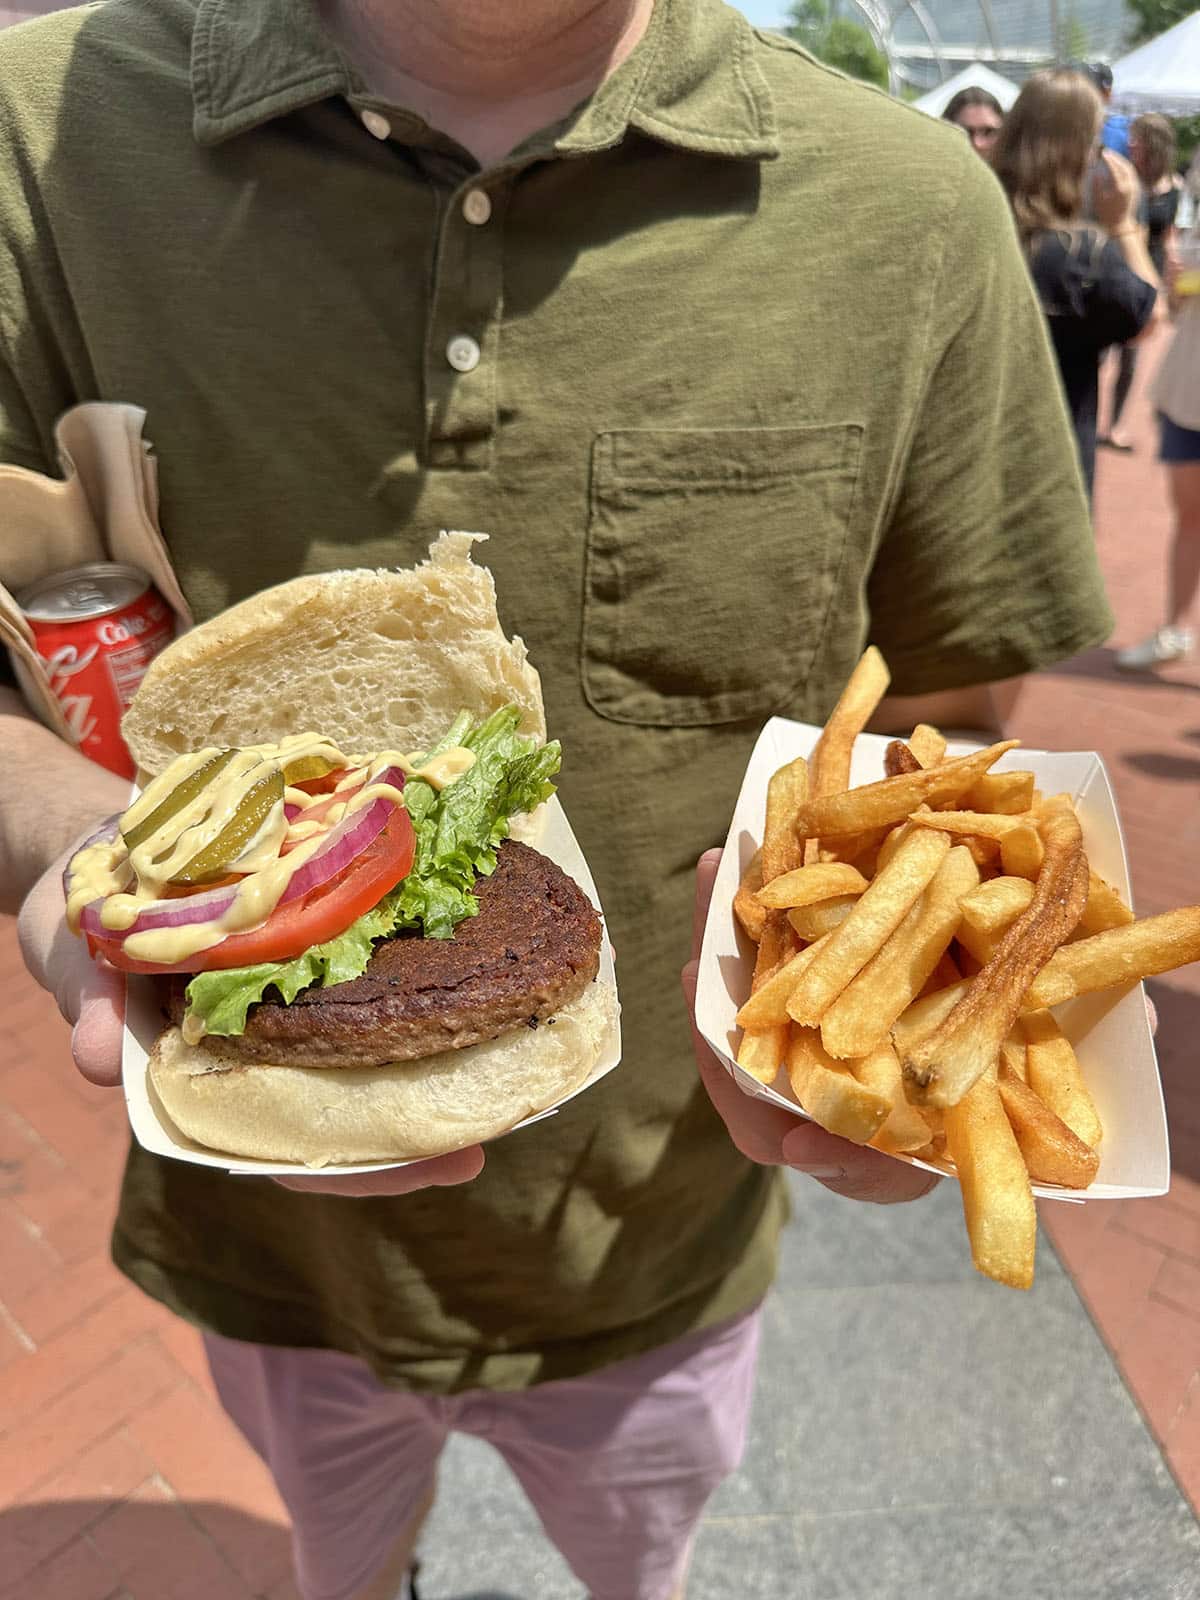 Hands holding Impossible Burger and fries from Top Bun in Des Moines, Iowa.